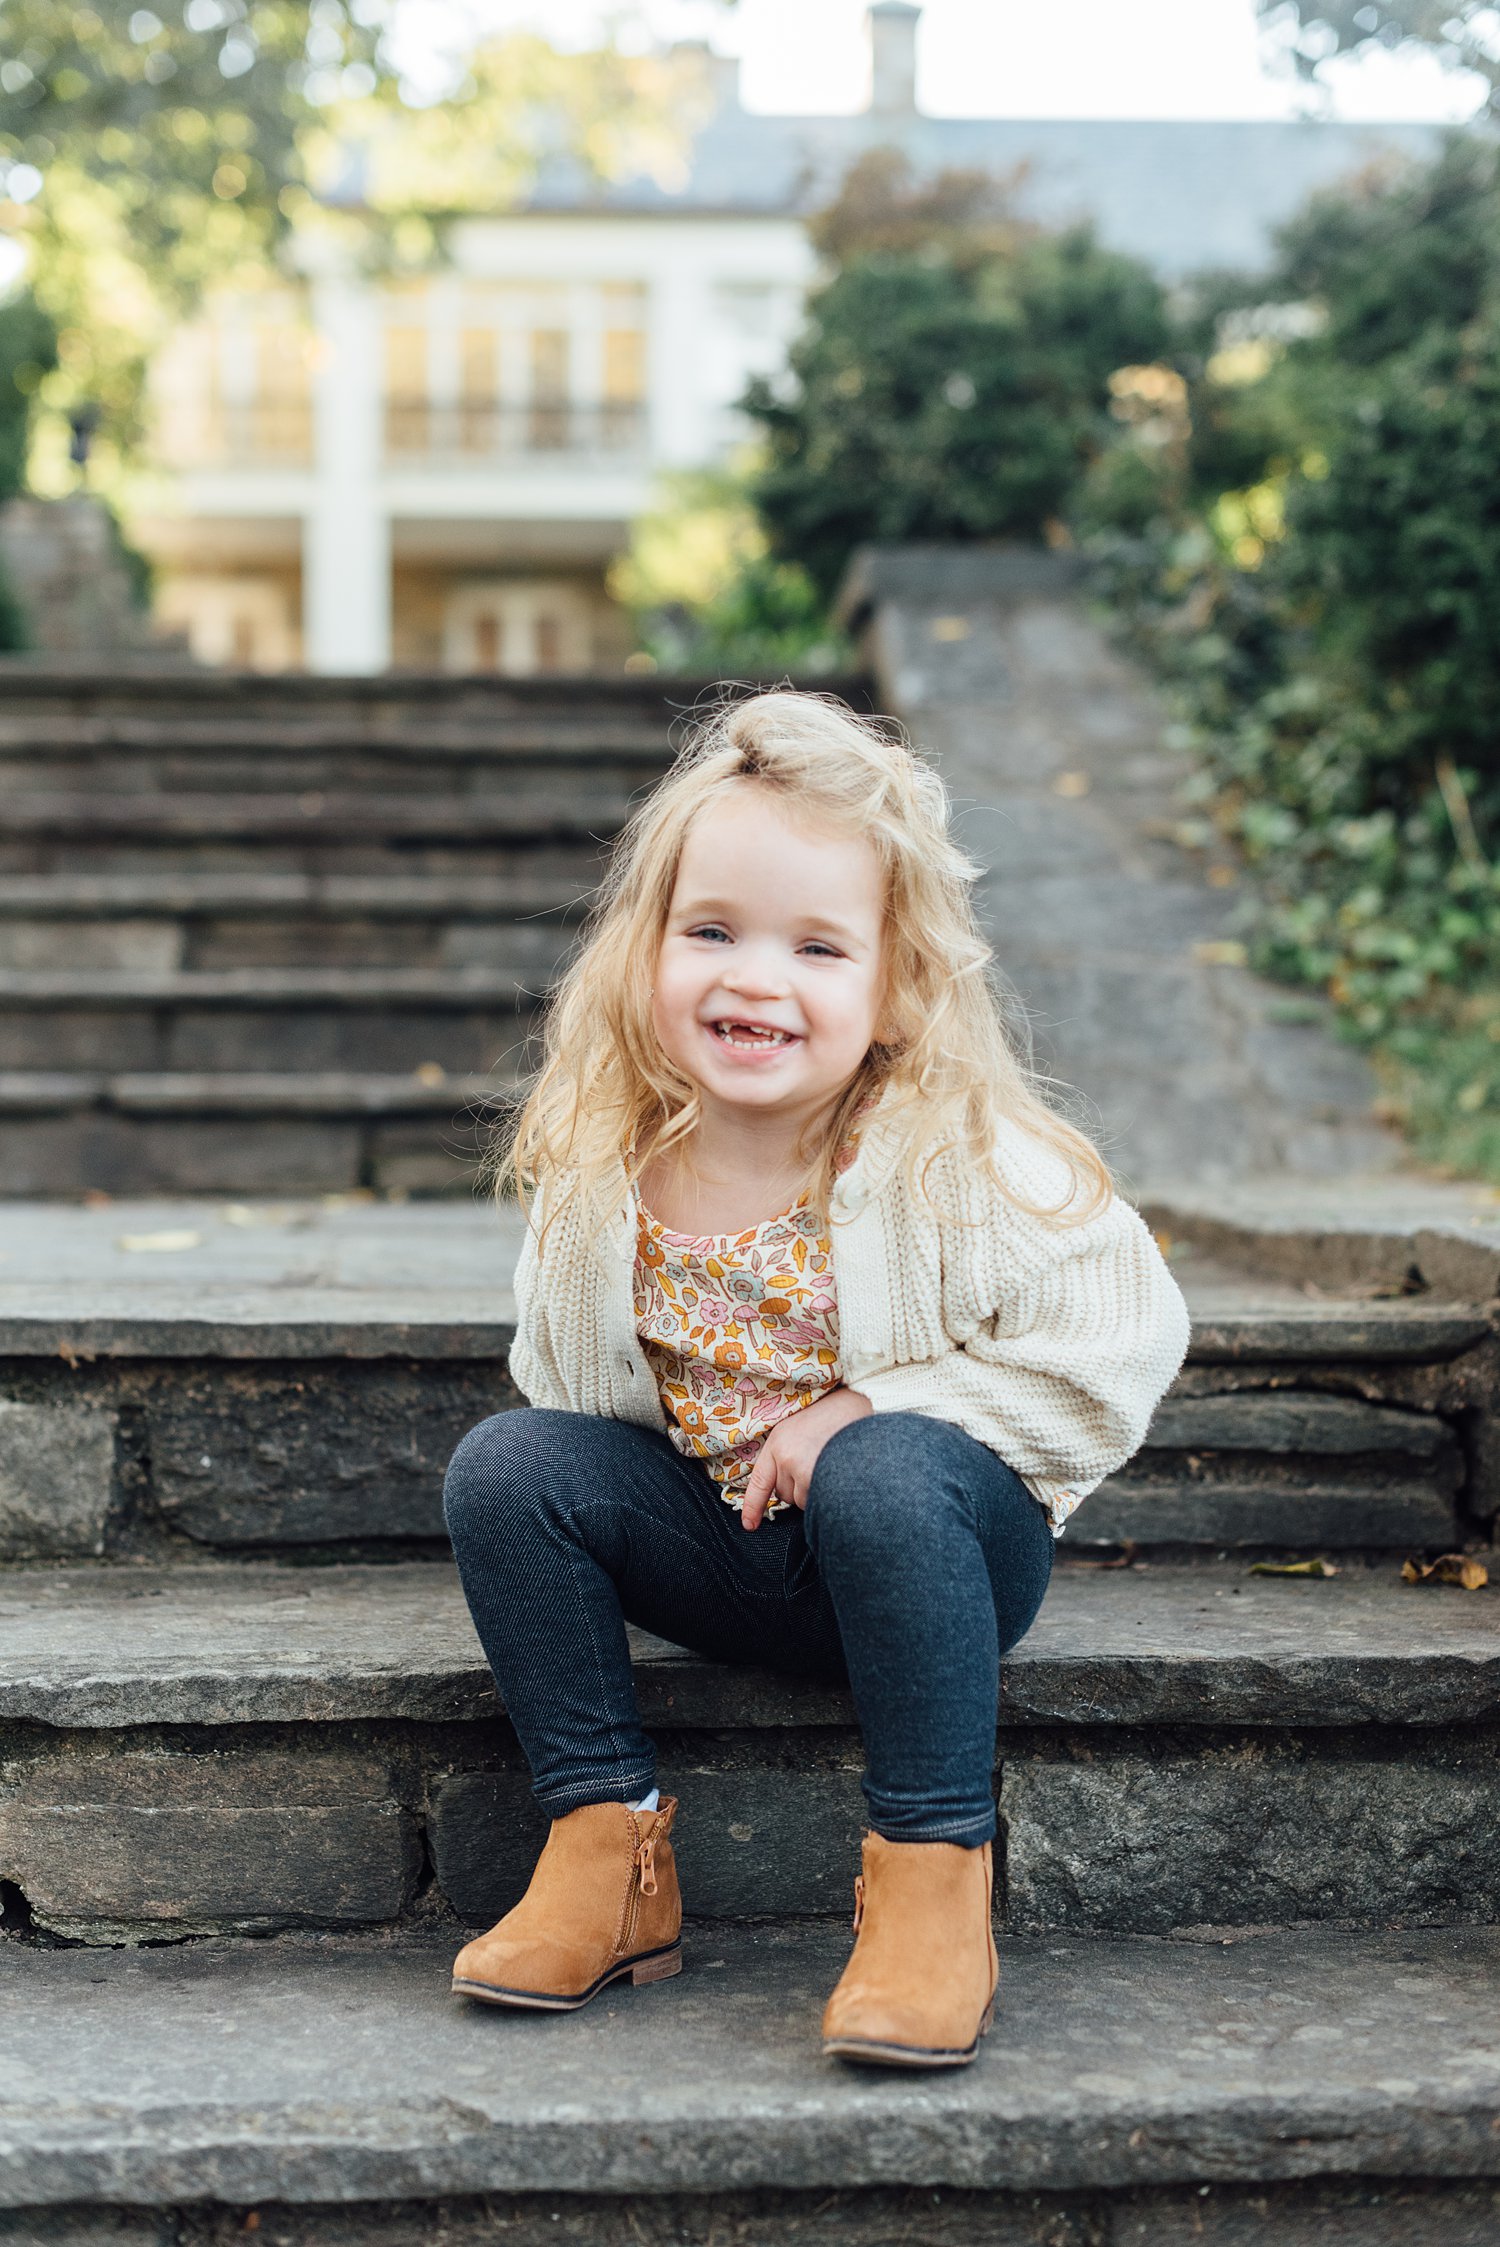 Rockville Civic Center Family Session - Glenview Mansion - Montgomery County Maryland Family Photographer - Alison Dunn Photography photo